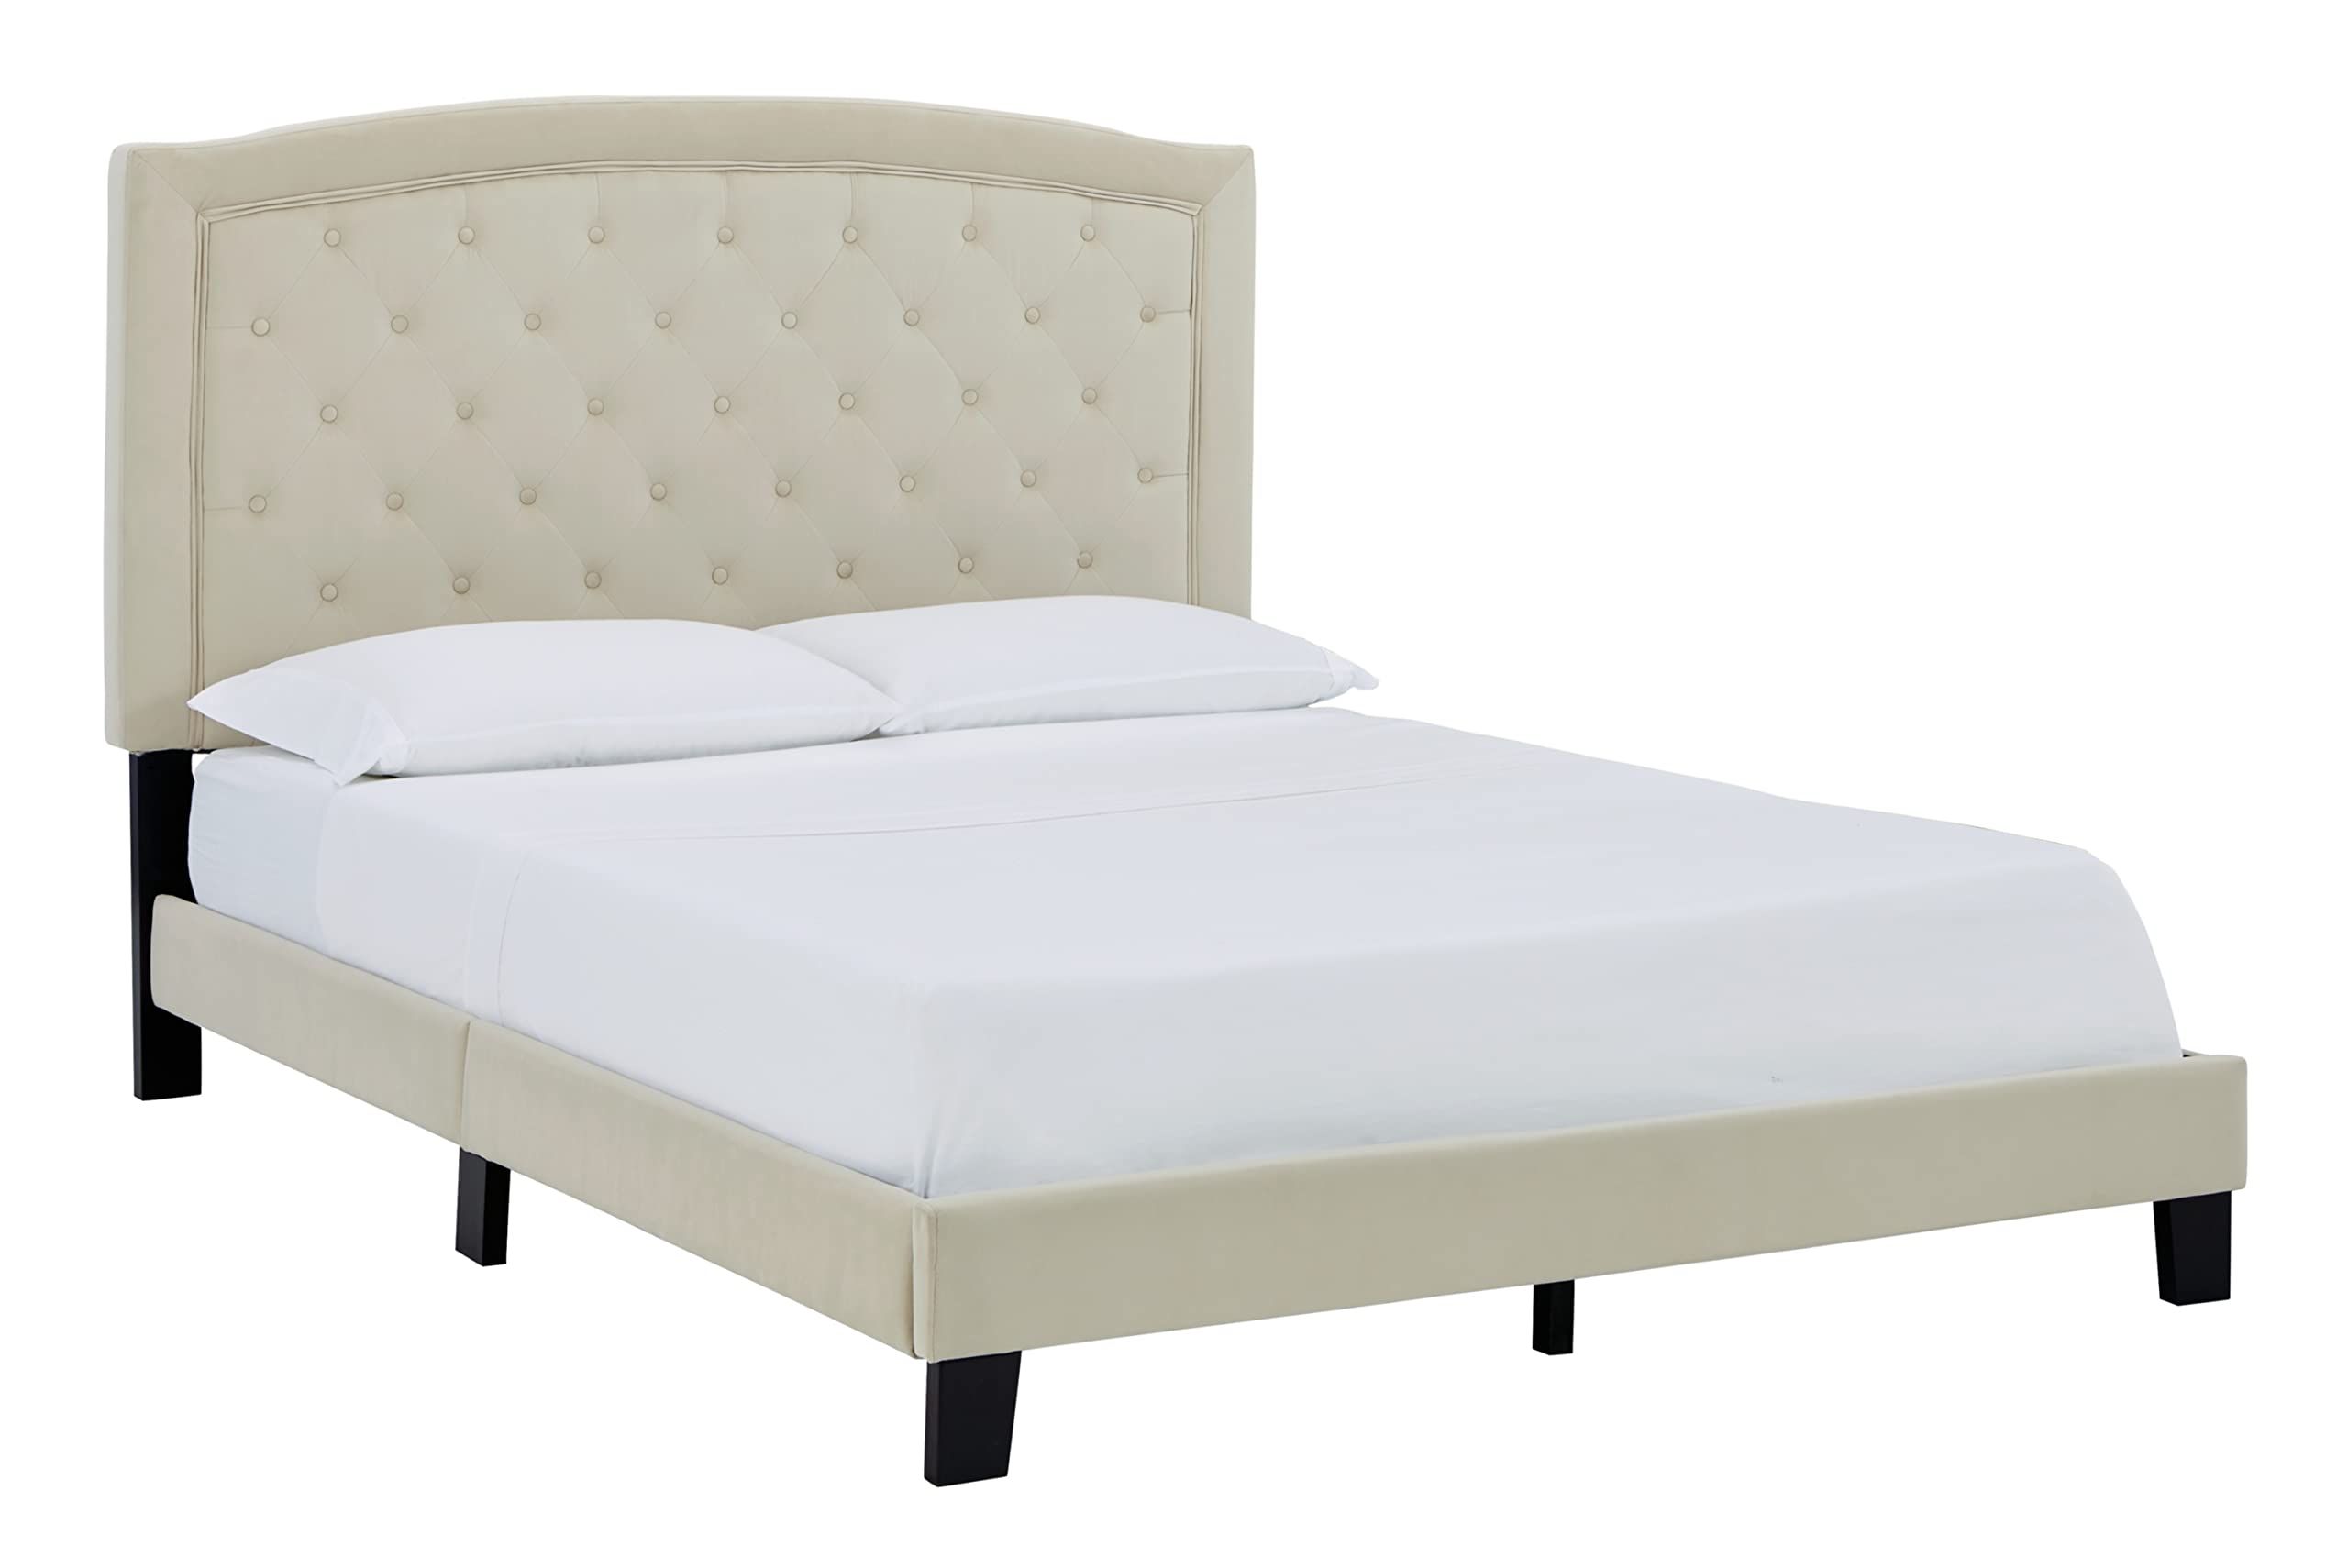 Signature Design by Ashley Adelloni Button Tufted Upholstered Bed Frame, King, Cream | Amazon (US)